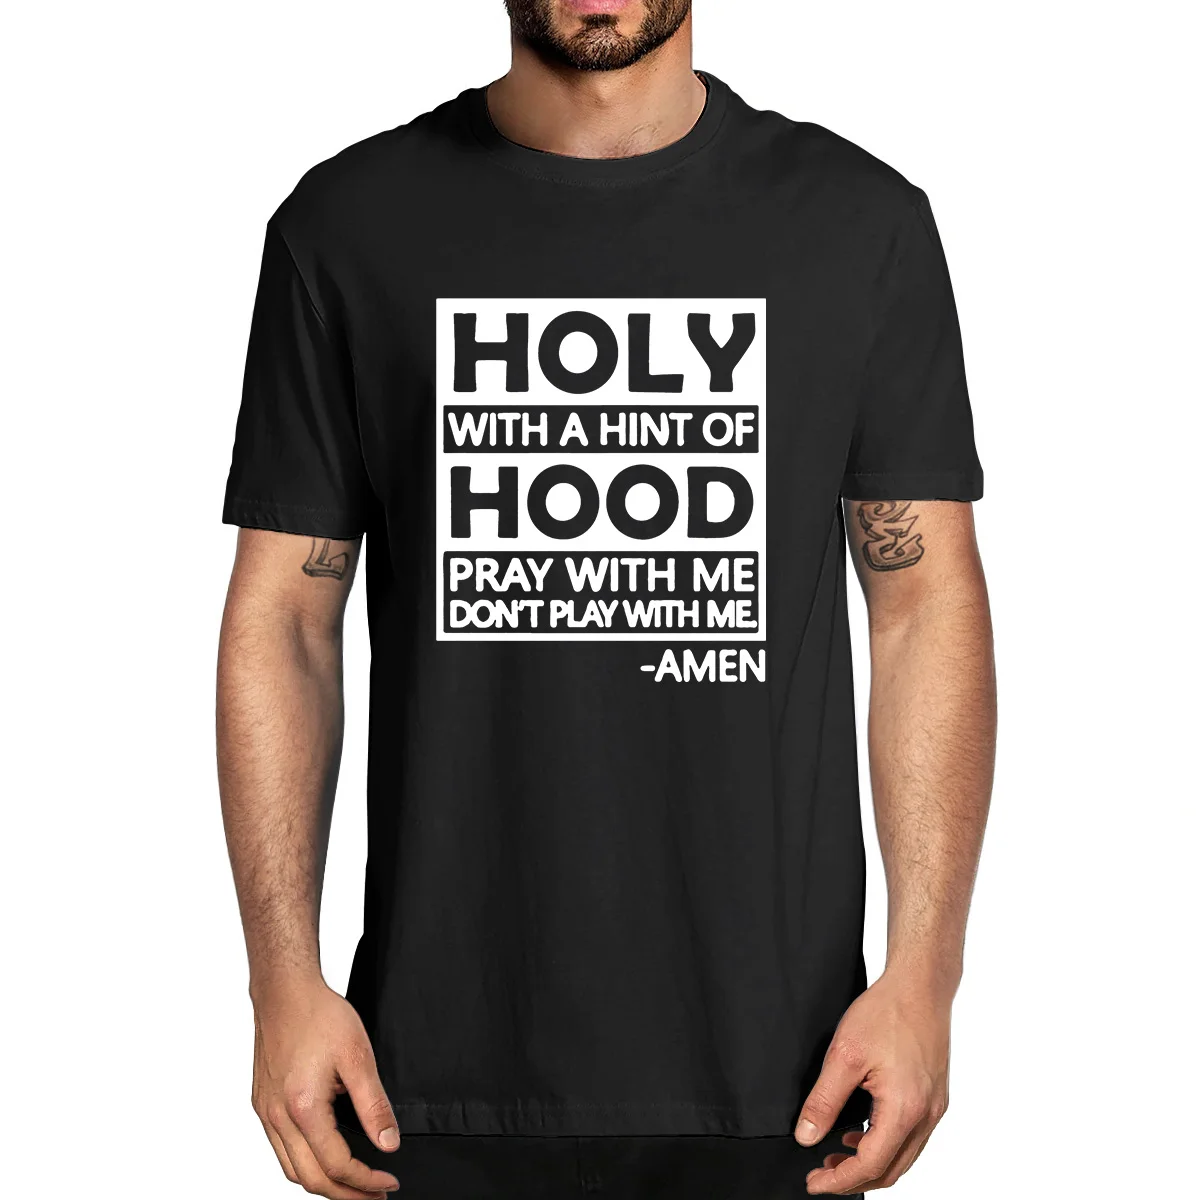 

Half Hood Half Holy Holy With A Hint Of Hood, Pray With Me , Don't Play With Me, A Men, Saying Layered Summer Men's T-Shirt Tee